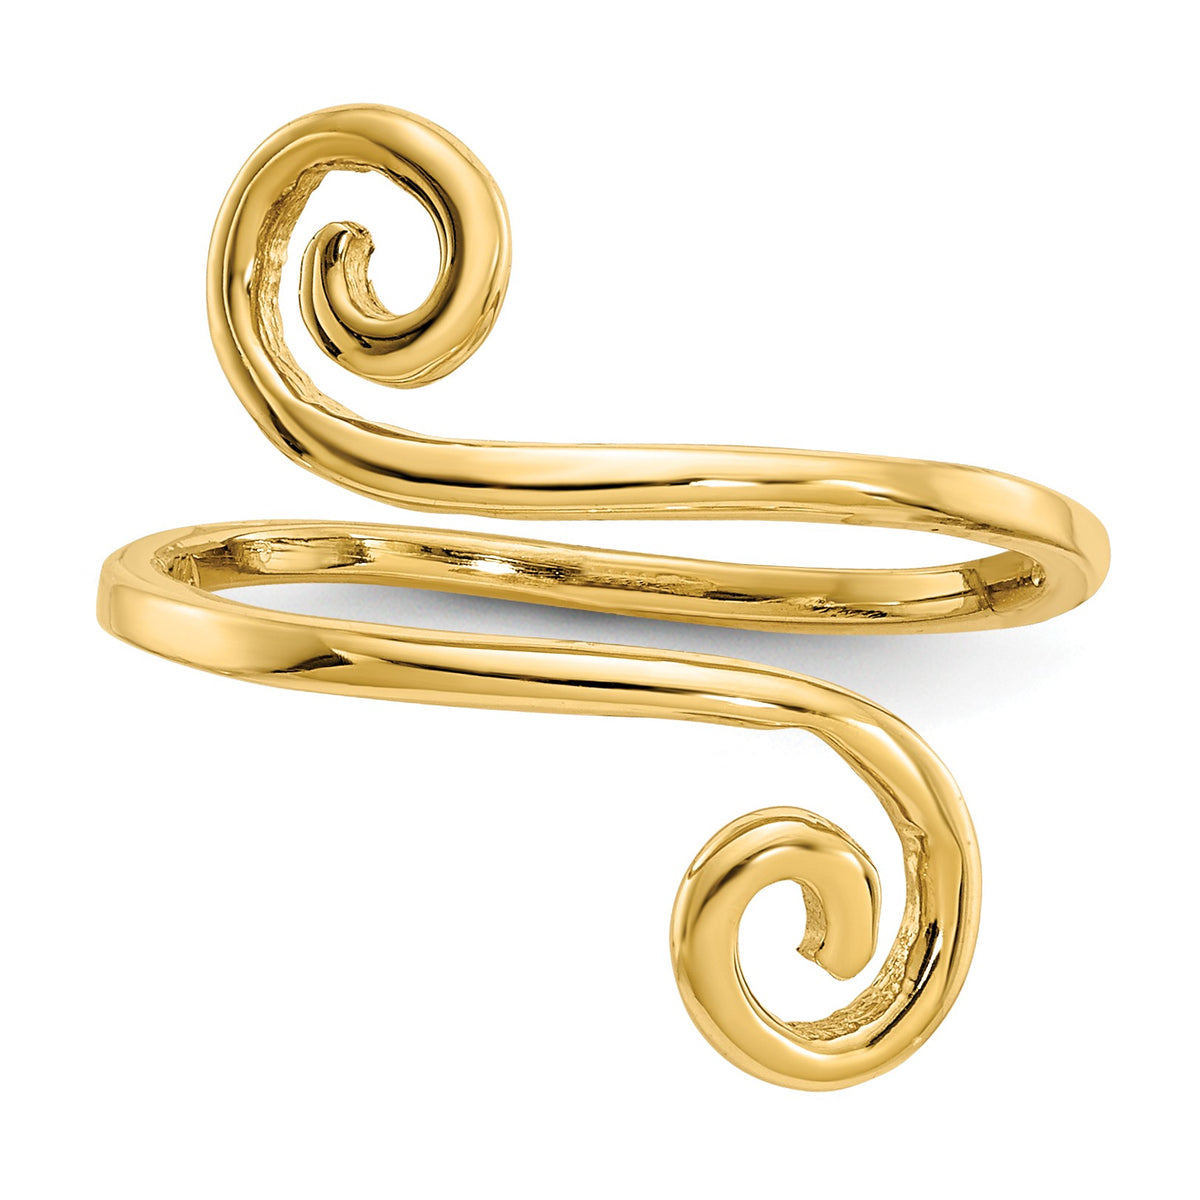 Alternate view of the Swirl Toe Adjustable Ring in 14 Karat Gold by The Black Bow Jewelry Co.